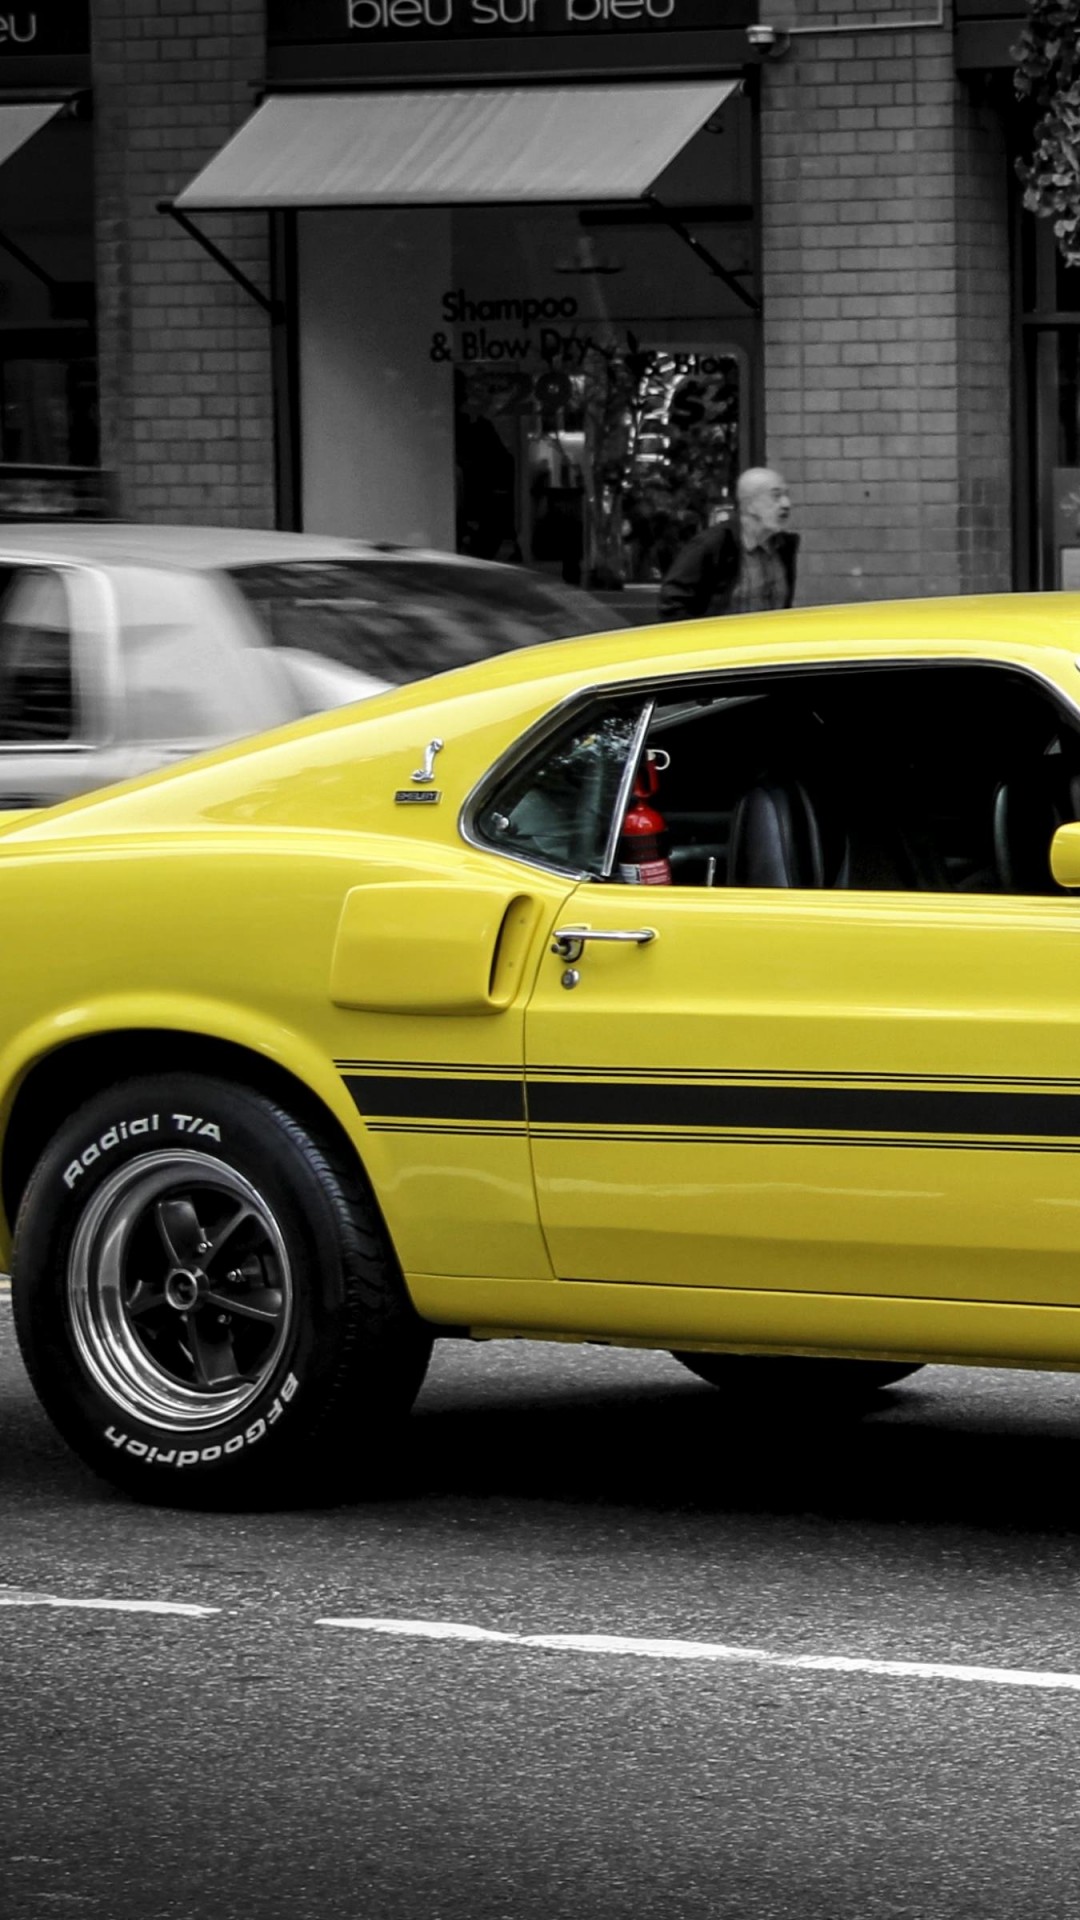 1969 Ford Mustang GT350 Wallpaper for SAMSUNG Galaxy Note 3